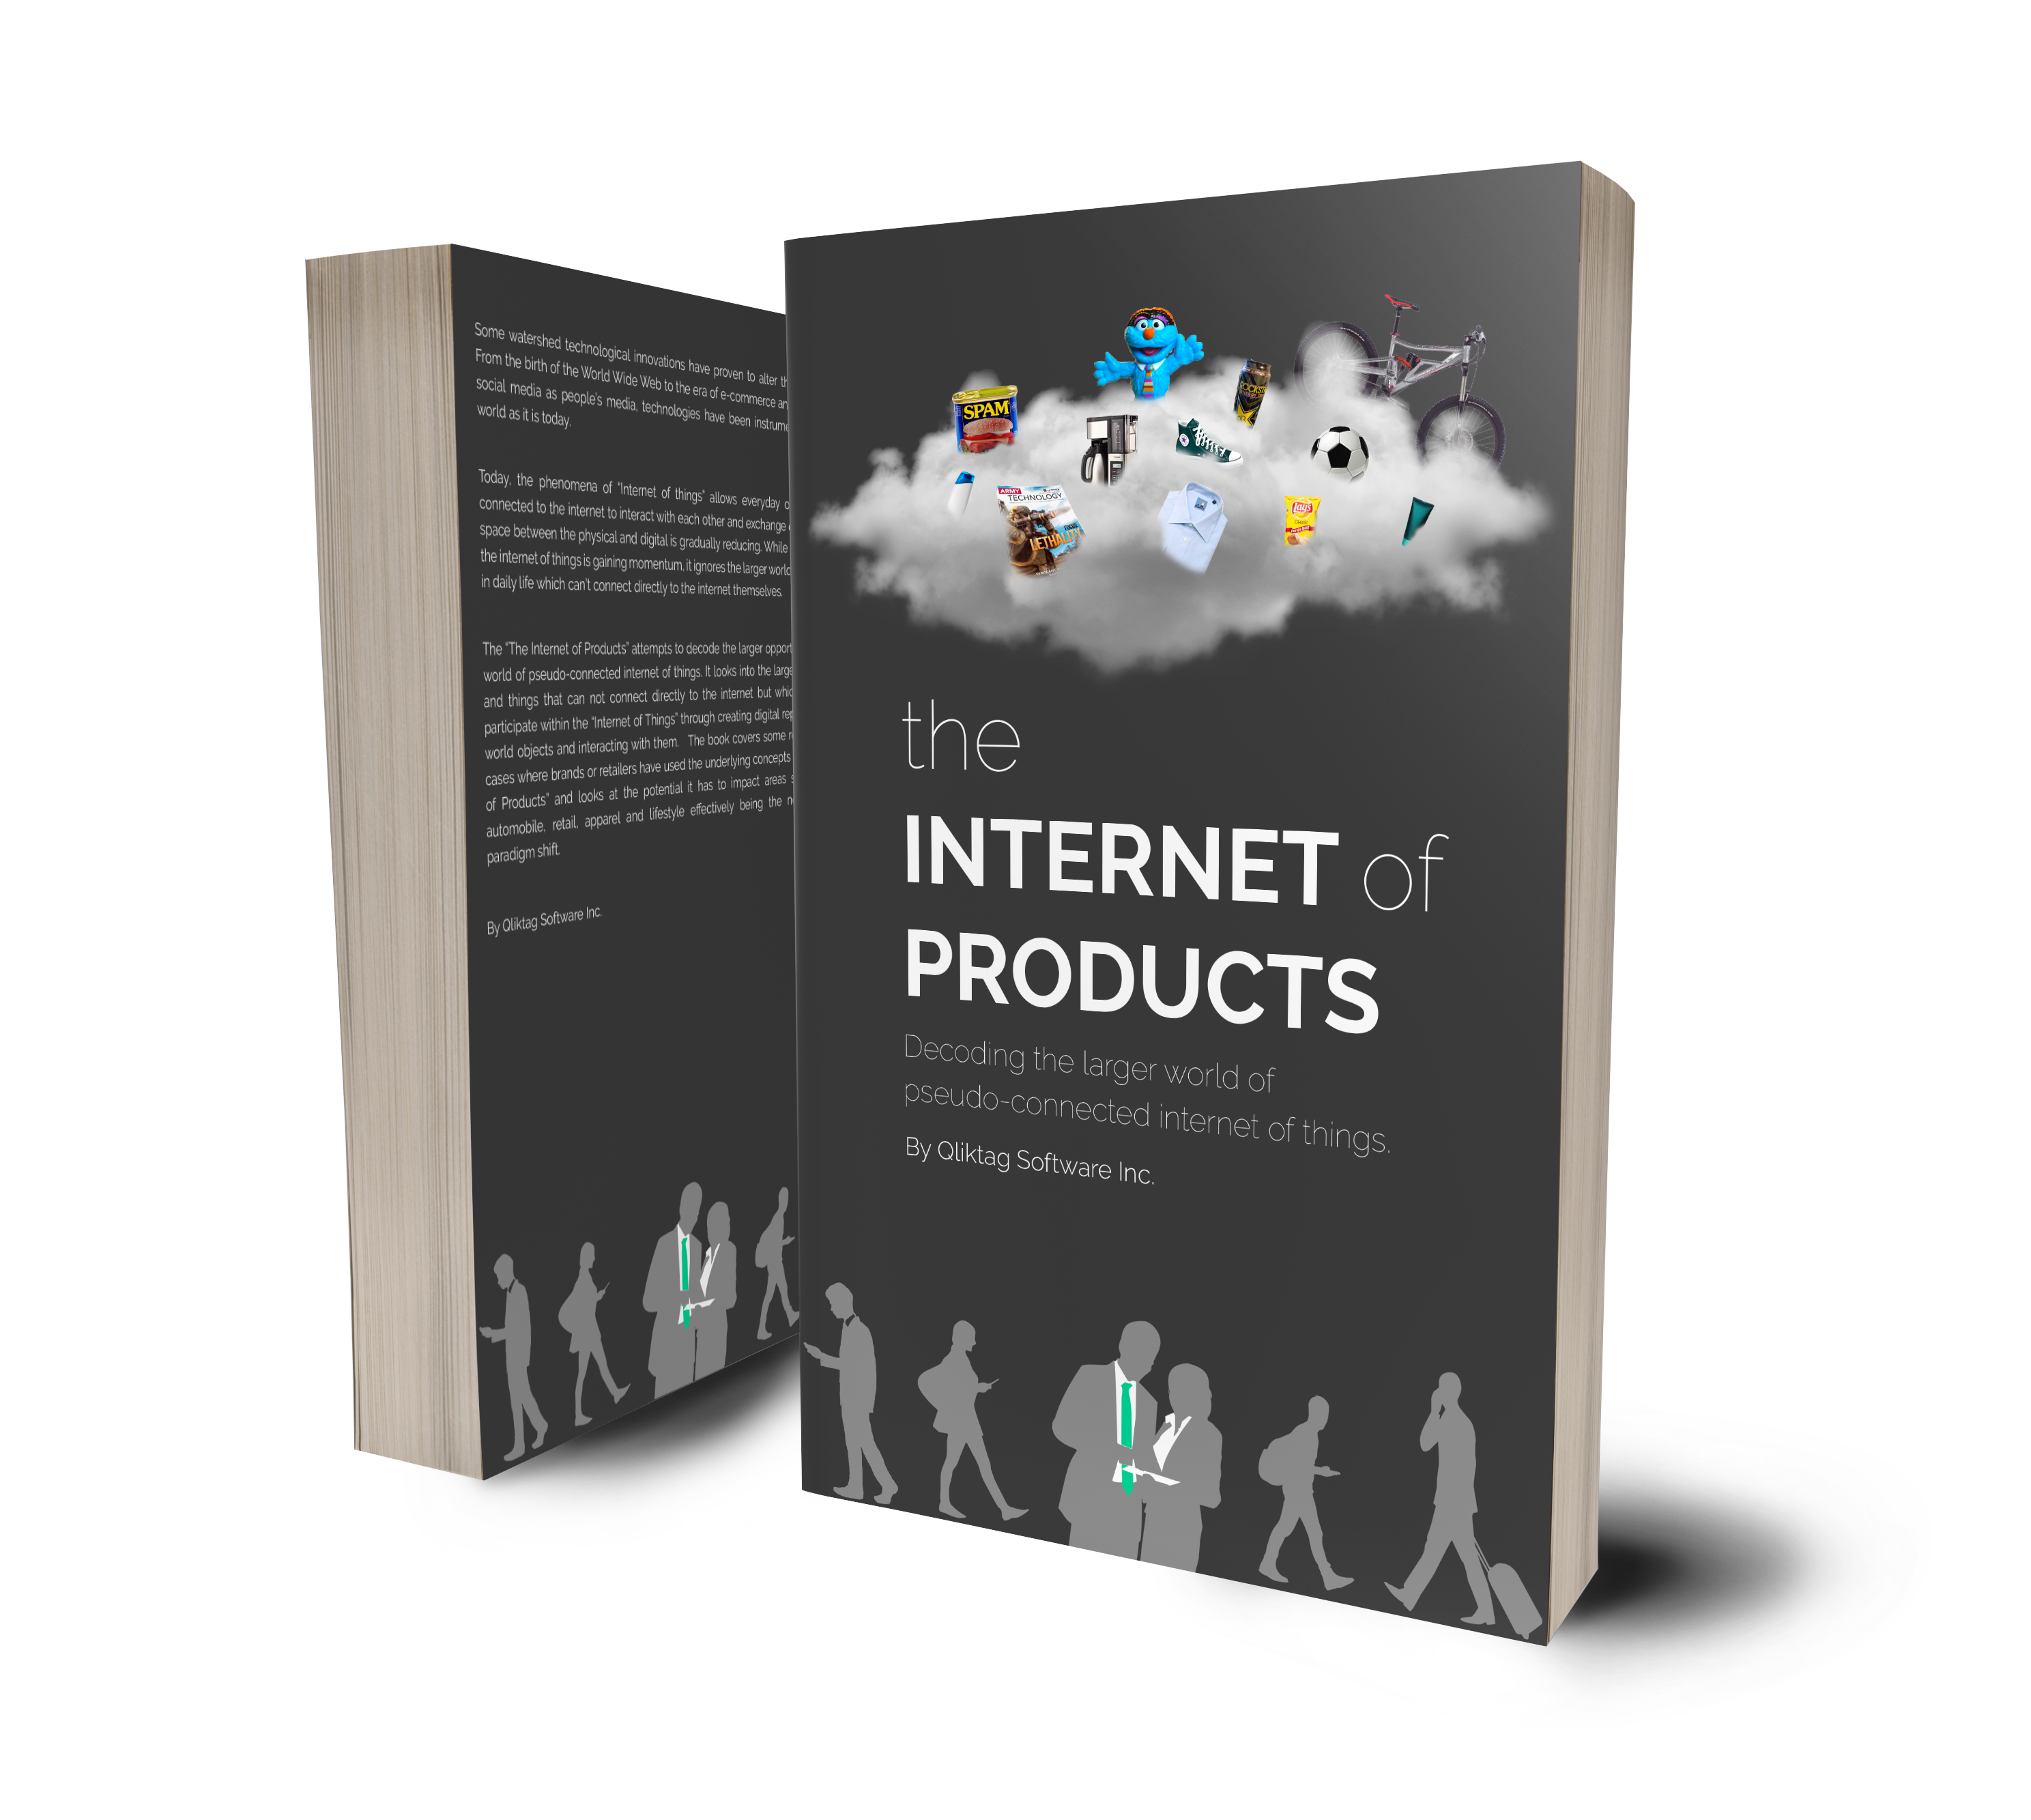 The Internet of Products - book by Qliktag Software